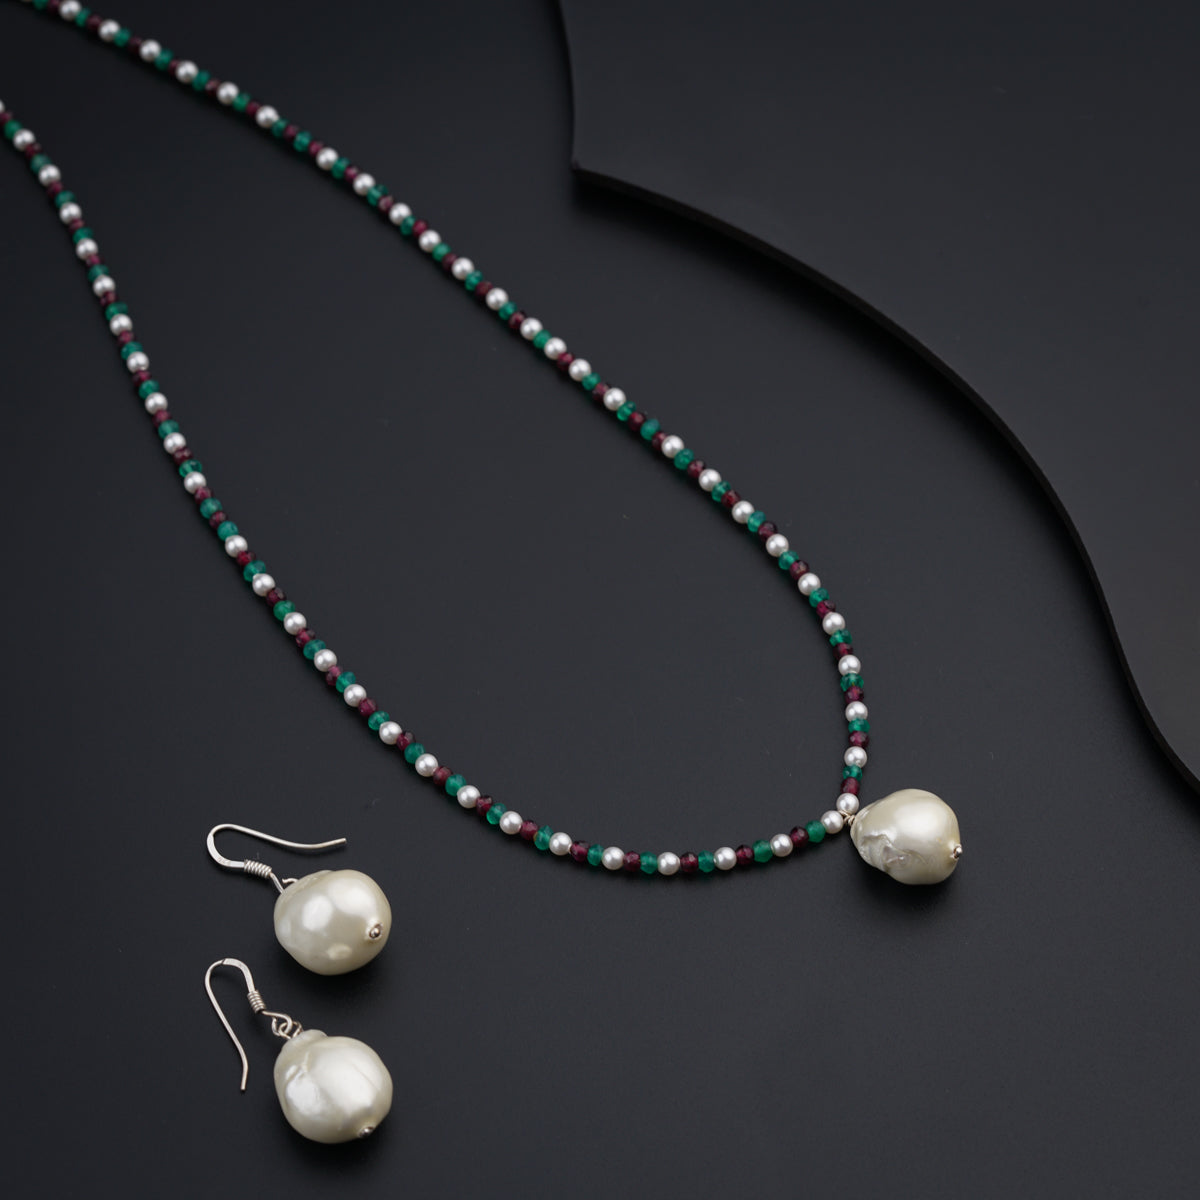 a necklace and earring with pearls on a black surface